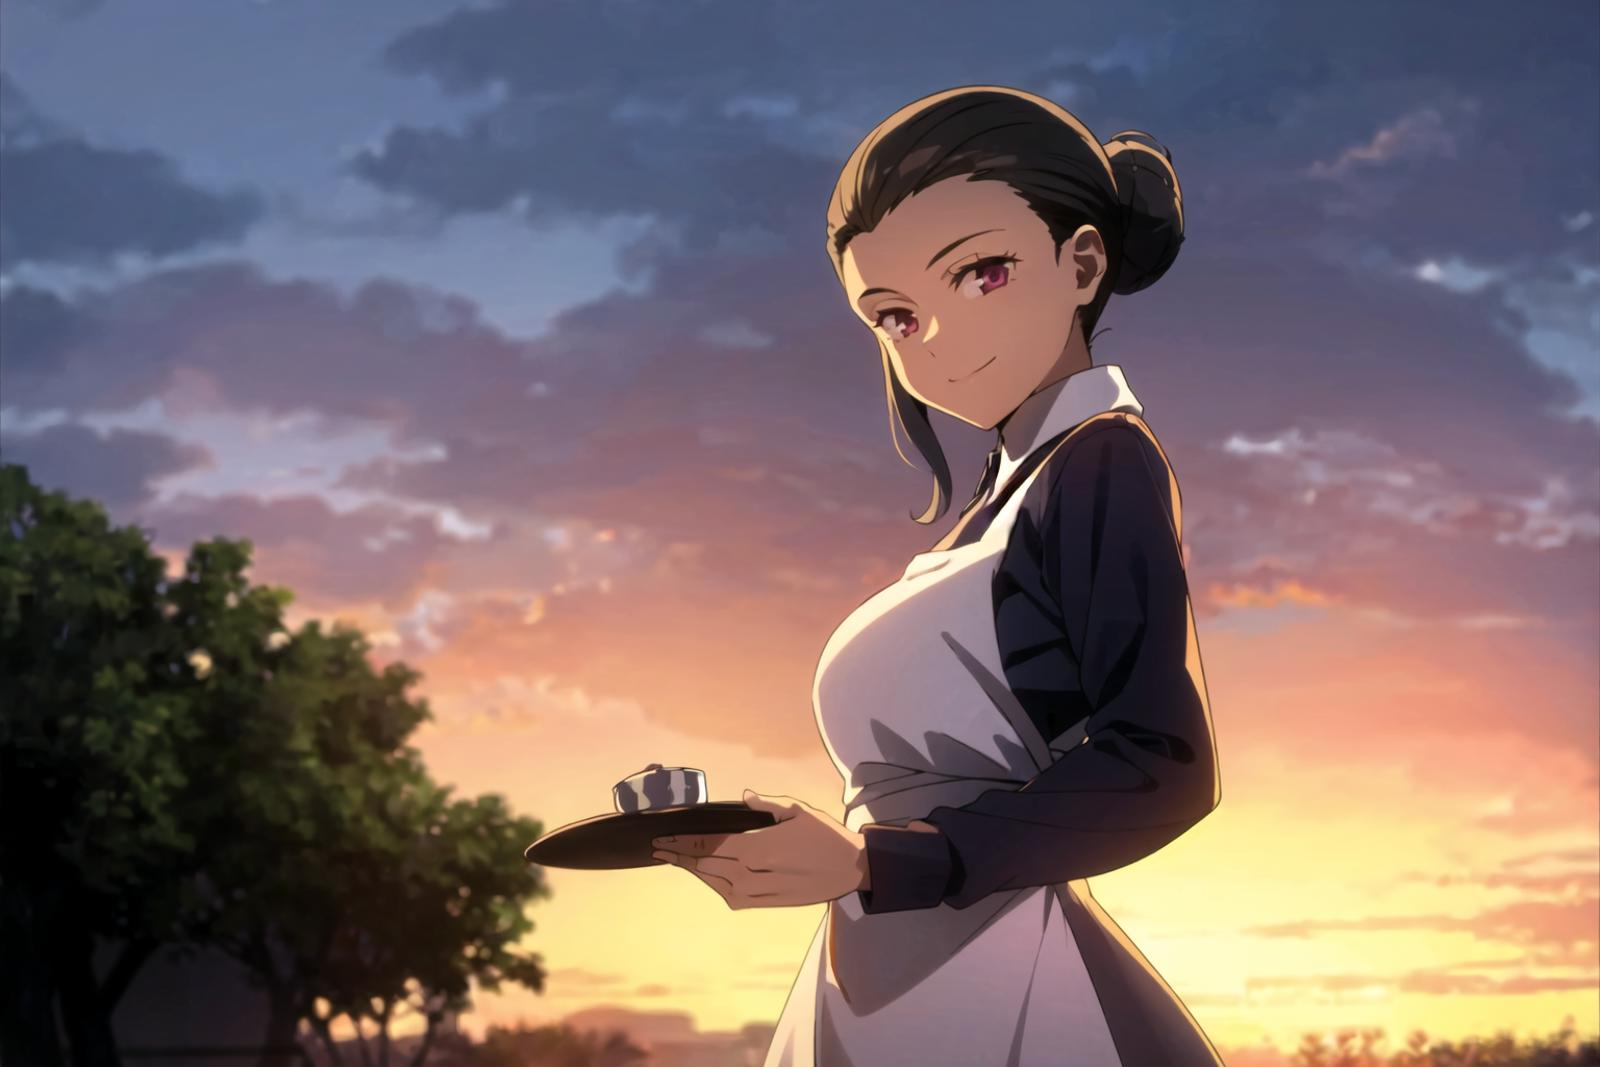 Isabella (The Promised Neverland) image by Maximax67